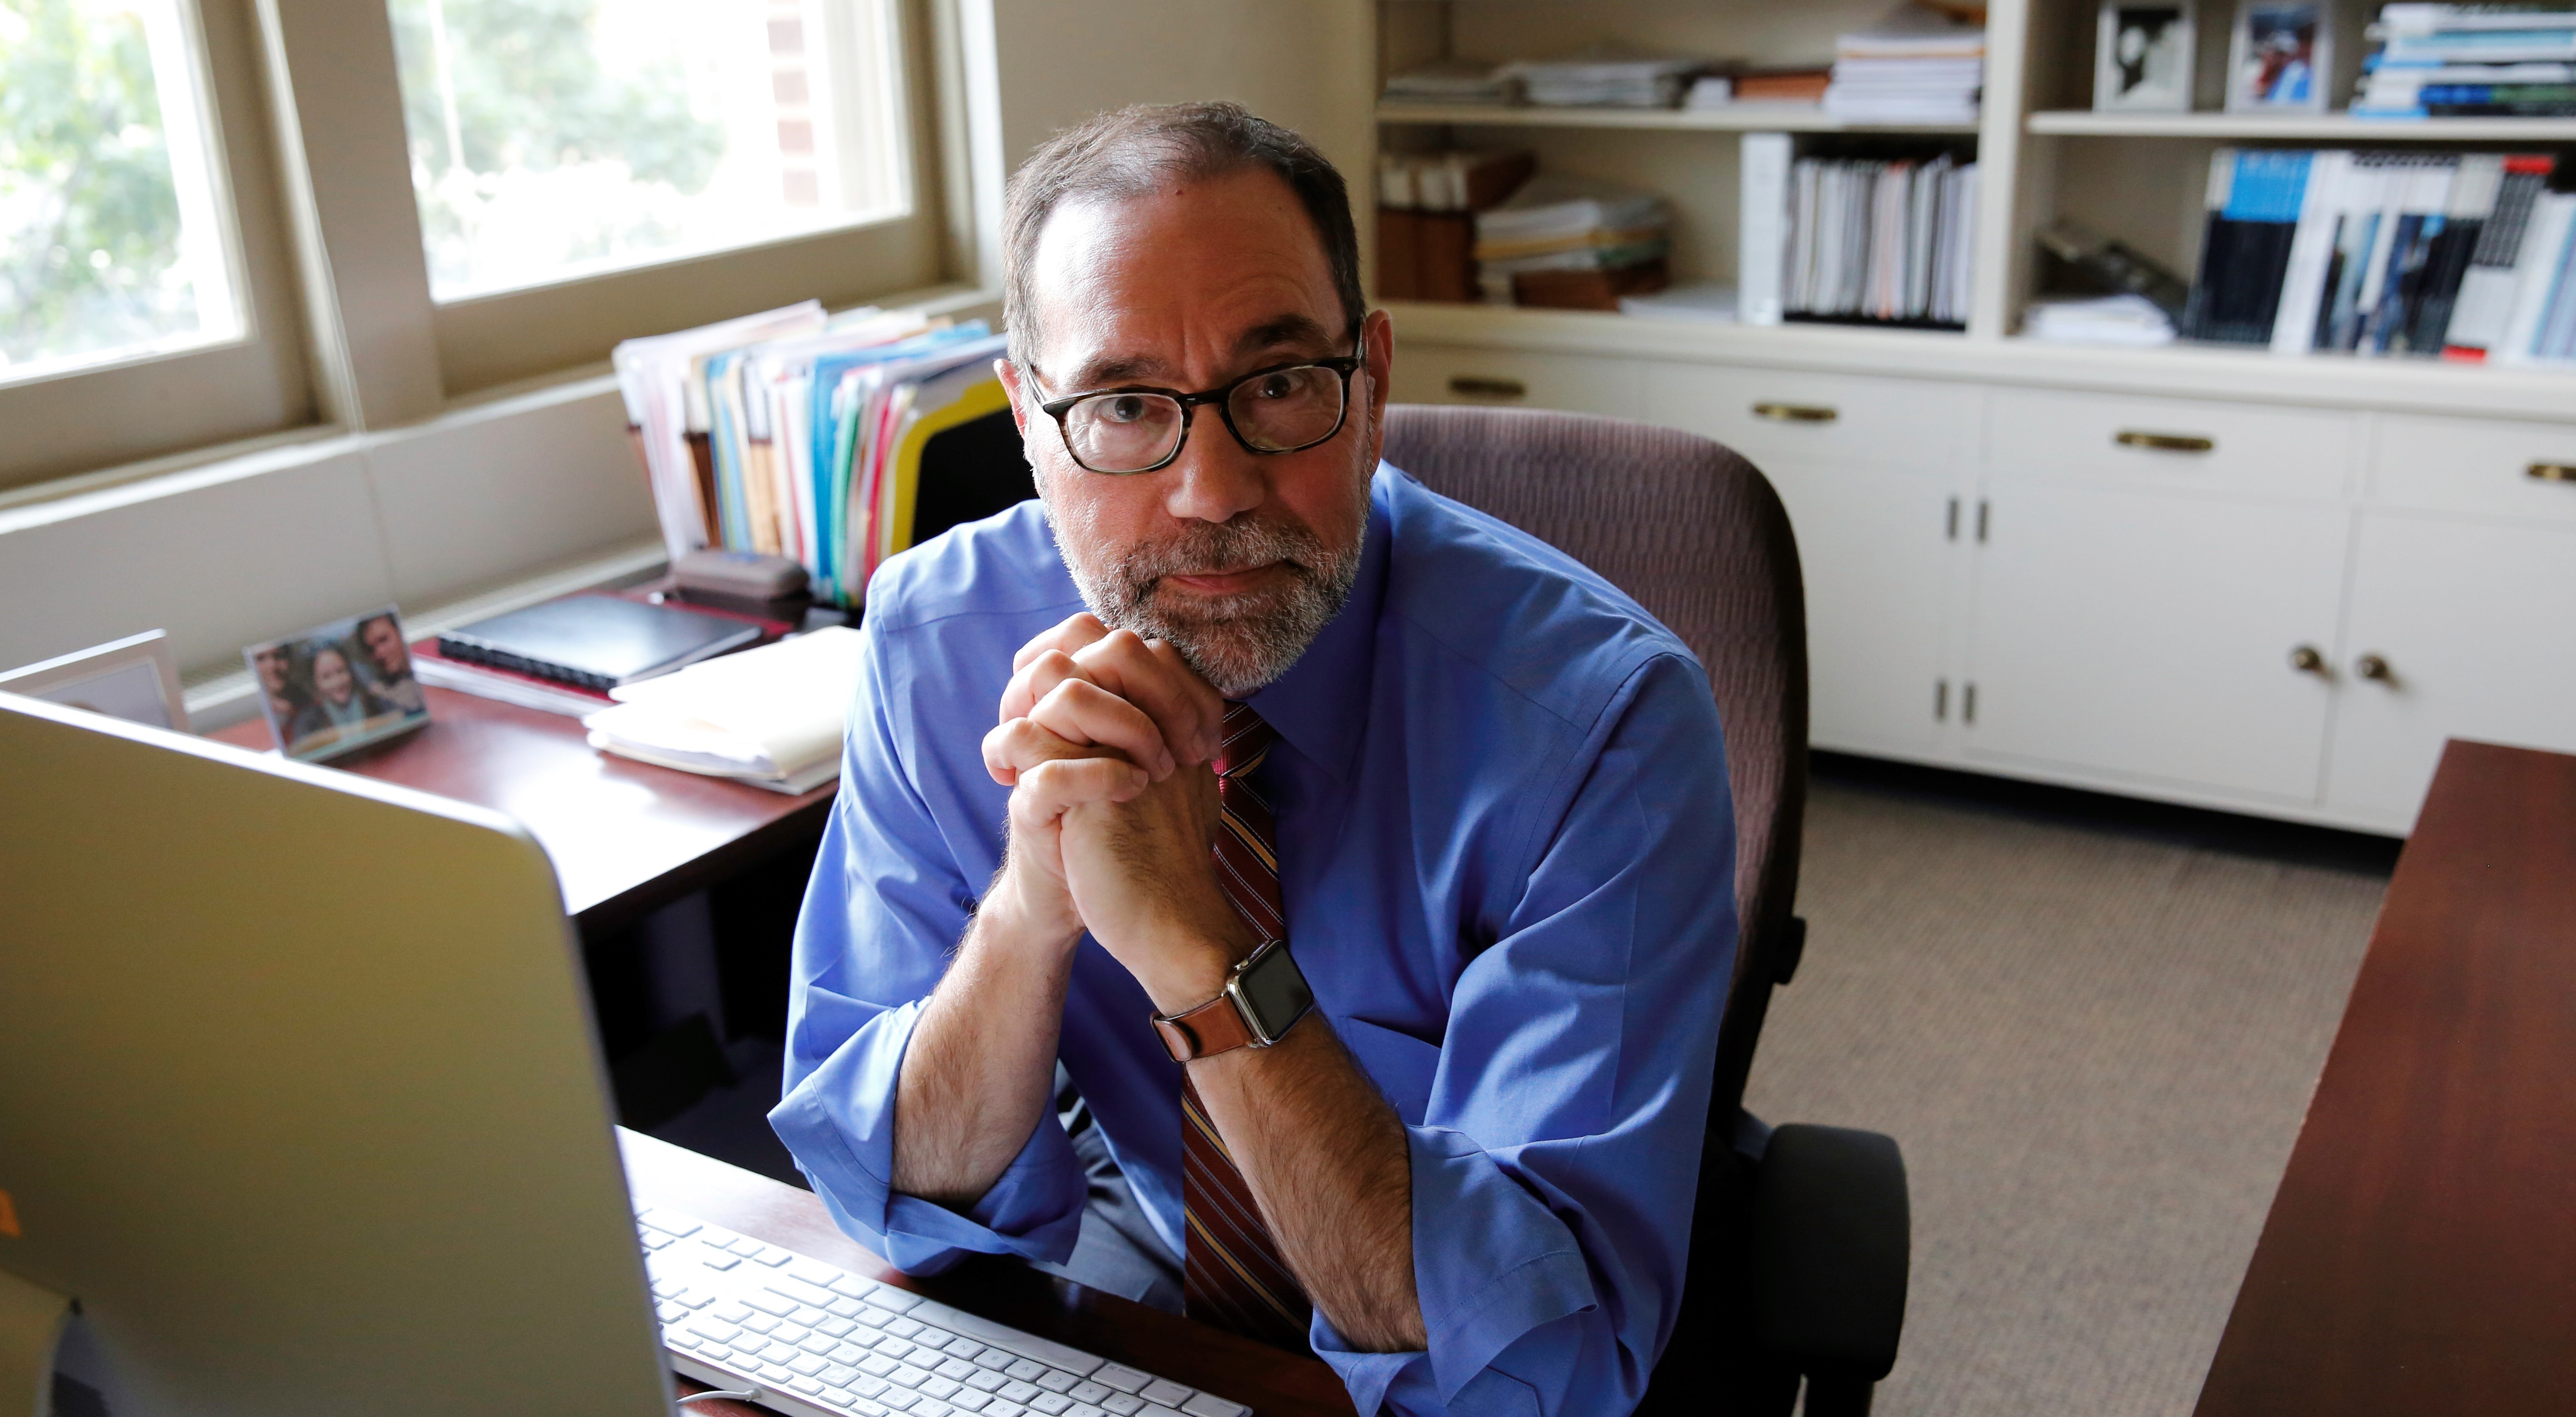 John Coleman, dean of the College of Liberal Arts, sitting at a desk in an office